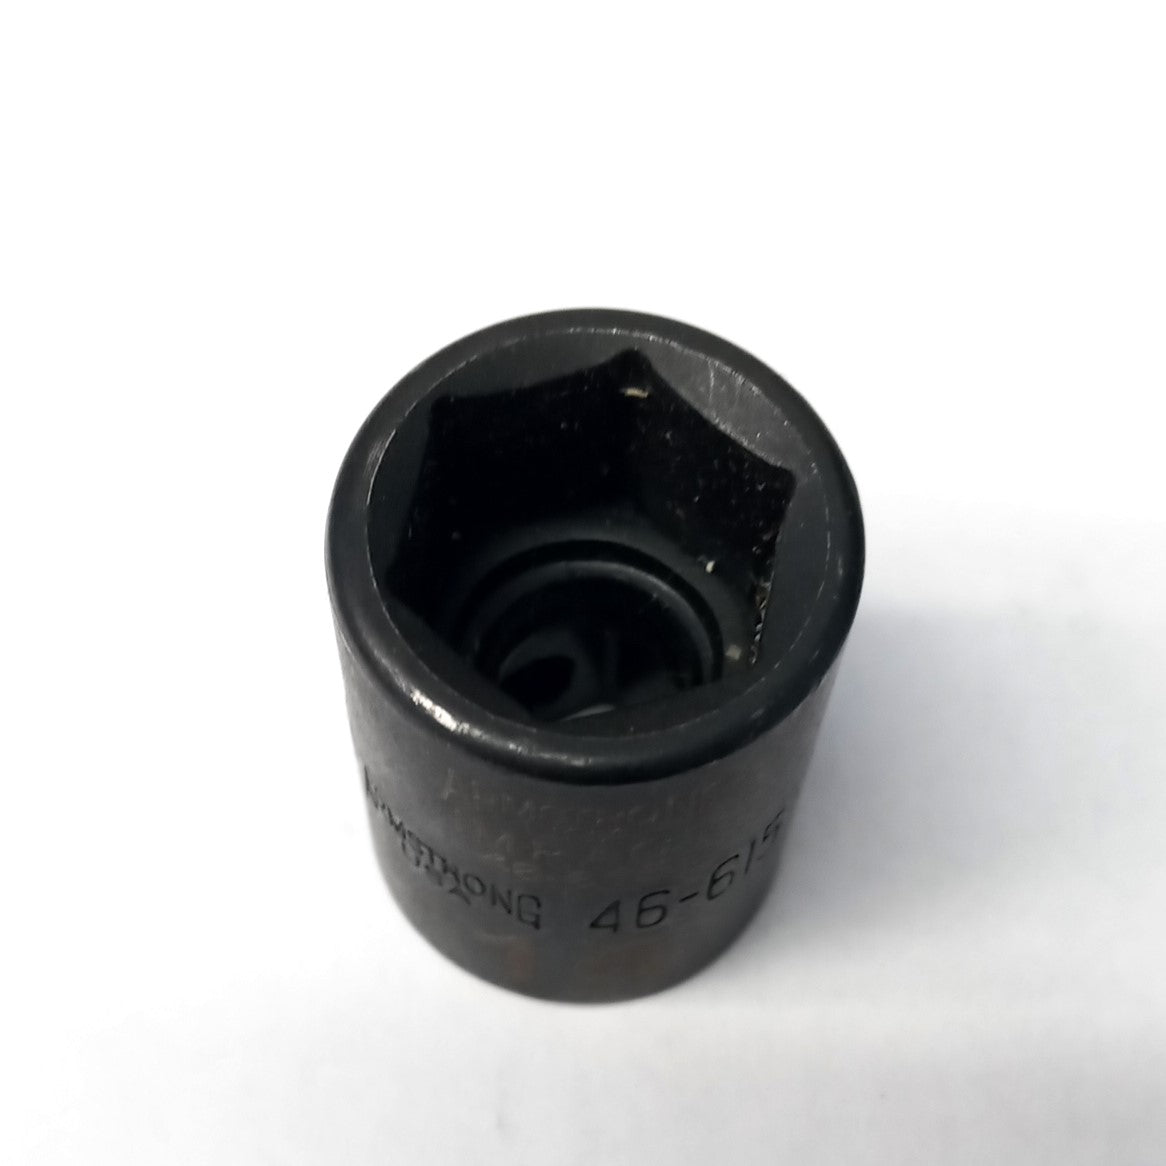 Armstrong 46-615 15 mm 3/8" Drive 6 Point Impact Socket USA